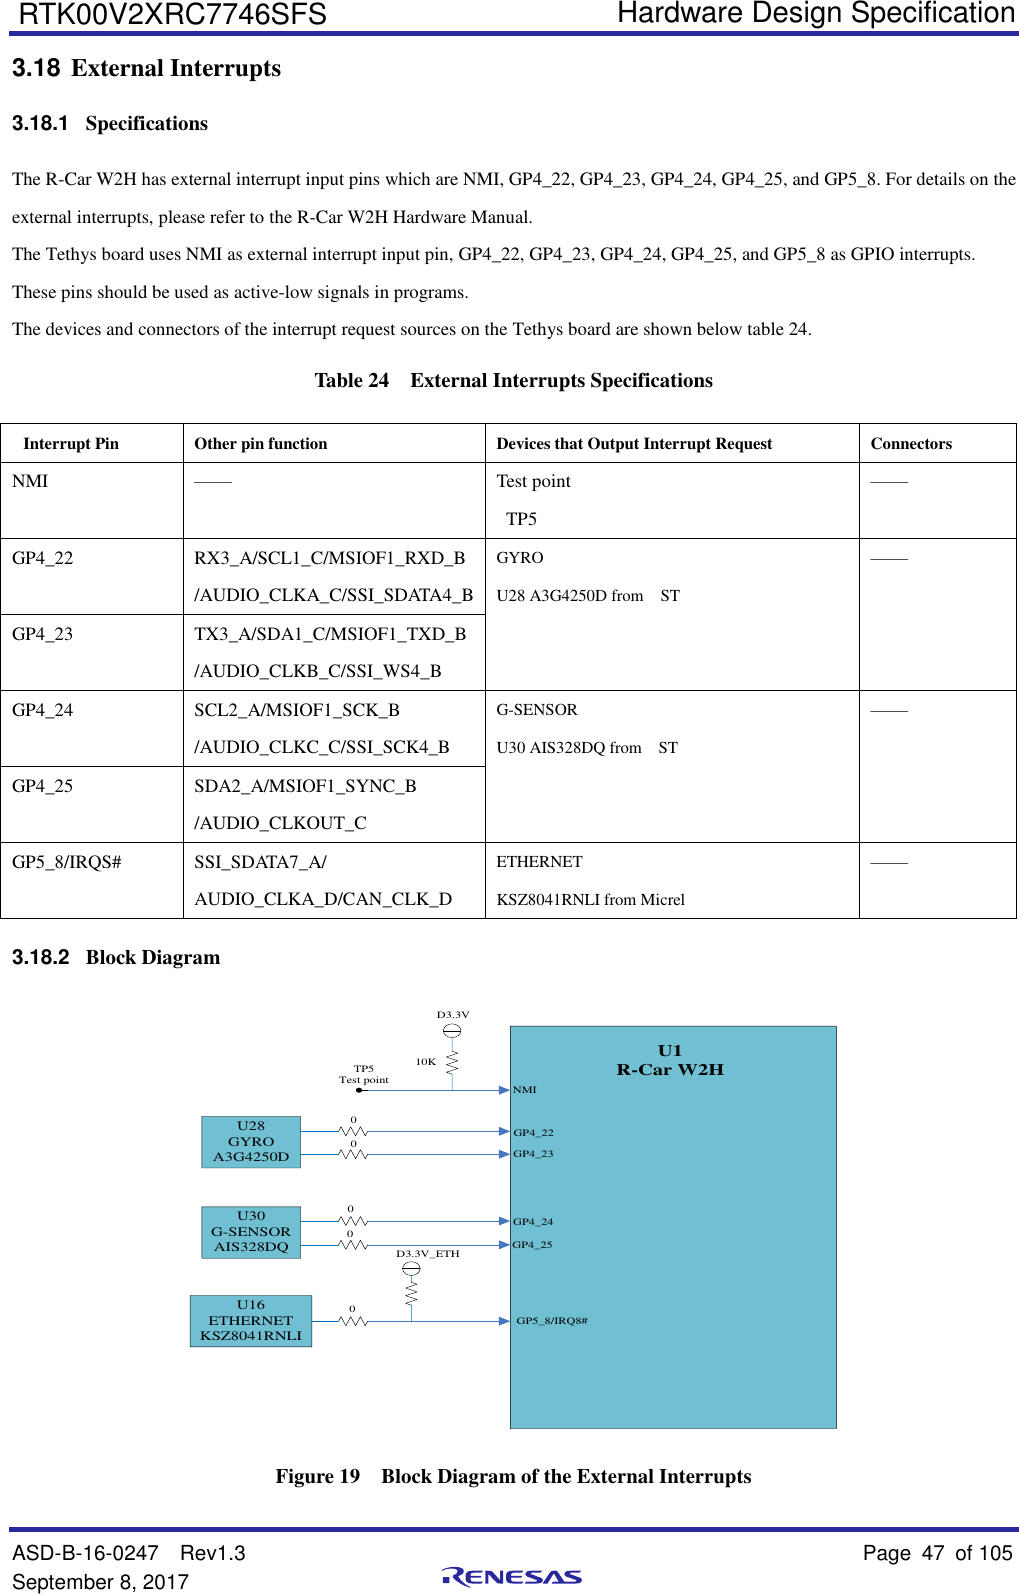   Hardware Design Specification ASD-B-16-0247  Rev1.3    Page 47  of 105 September 8, 2017      RTK00V2XRC7746SFS 3.18 External Interrupts 3.18.1  Specifications The R-Car W2H has external interrupt input pins which are NMI, GP4_22, GP4_23, GP4_24, GP4_25, and GP5_8. For details on the external interrupts, please refer to the R-Car W2H Hardware Manual. The Tethys board uses NMI as external interrupt input pin, GP4_22, GP4_23, GP4_24, GP4_25, and GP5_8 as GPIO interrupts. These pins should be used as active-low signals in programs. The devices and connectors of the interrupt request sources on the Tethys board are shown below table 24. Table 24  External Interrupts Specifications Interrupt Pin  Other pin function Devices that Output Interrupt Request Connectors NMI —— Test point   TP5 —— GP4_22 RX3_A/SCL1_C/MSIOF1_RXD_B /AUDIO_CLKA_C/SSI_SDATA4_B GYRO U28 A3G4250D from    ST —— GP4_23 TX3_A/SDA1_C/MSIOF1_TXD_B /AUDIO_CLKB_C/SSI_WS4_B GP4_24 SCL2_A/MSIOF1_SCK_B /AUDIO_CLKC_C/SSI_SCK4_B G-SENSOR U30 AIS328DQ from    ST —— GP4_25 SDA2_A/MSIOF1_SYNC_B /AUDIO_CLKOUT_C GP5_8/IRQS# SSI_SDATA7_A/ AUDIO_CLKA_D/CAN_CLK_D ETHERNET KSZ8041RNLI from Micrel —— 3.18.2  Block Diagram U1R-Car W2HNMID3.3VTP5Test pointGP4_22GP4_23U28GYROA3G4250D00GP4_24GP4_2500U30G-SENSORAIS328DQGP5_8/IRQ8#0U16ETHERNETKSZ8041RNLI10KD3.3V_ETH Figure 19  Block Diagram of the External Interrupts 